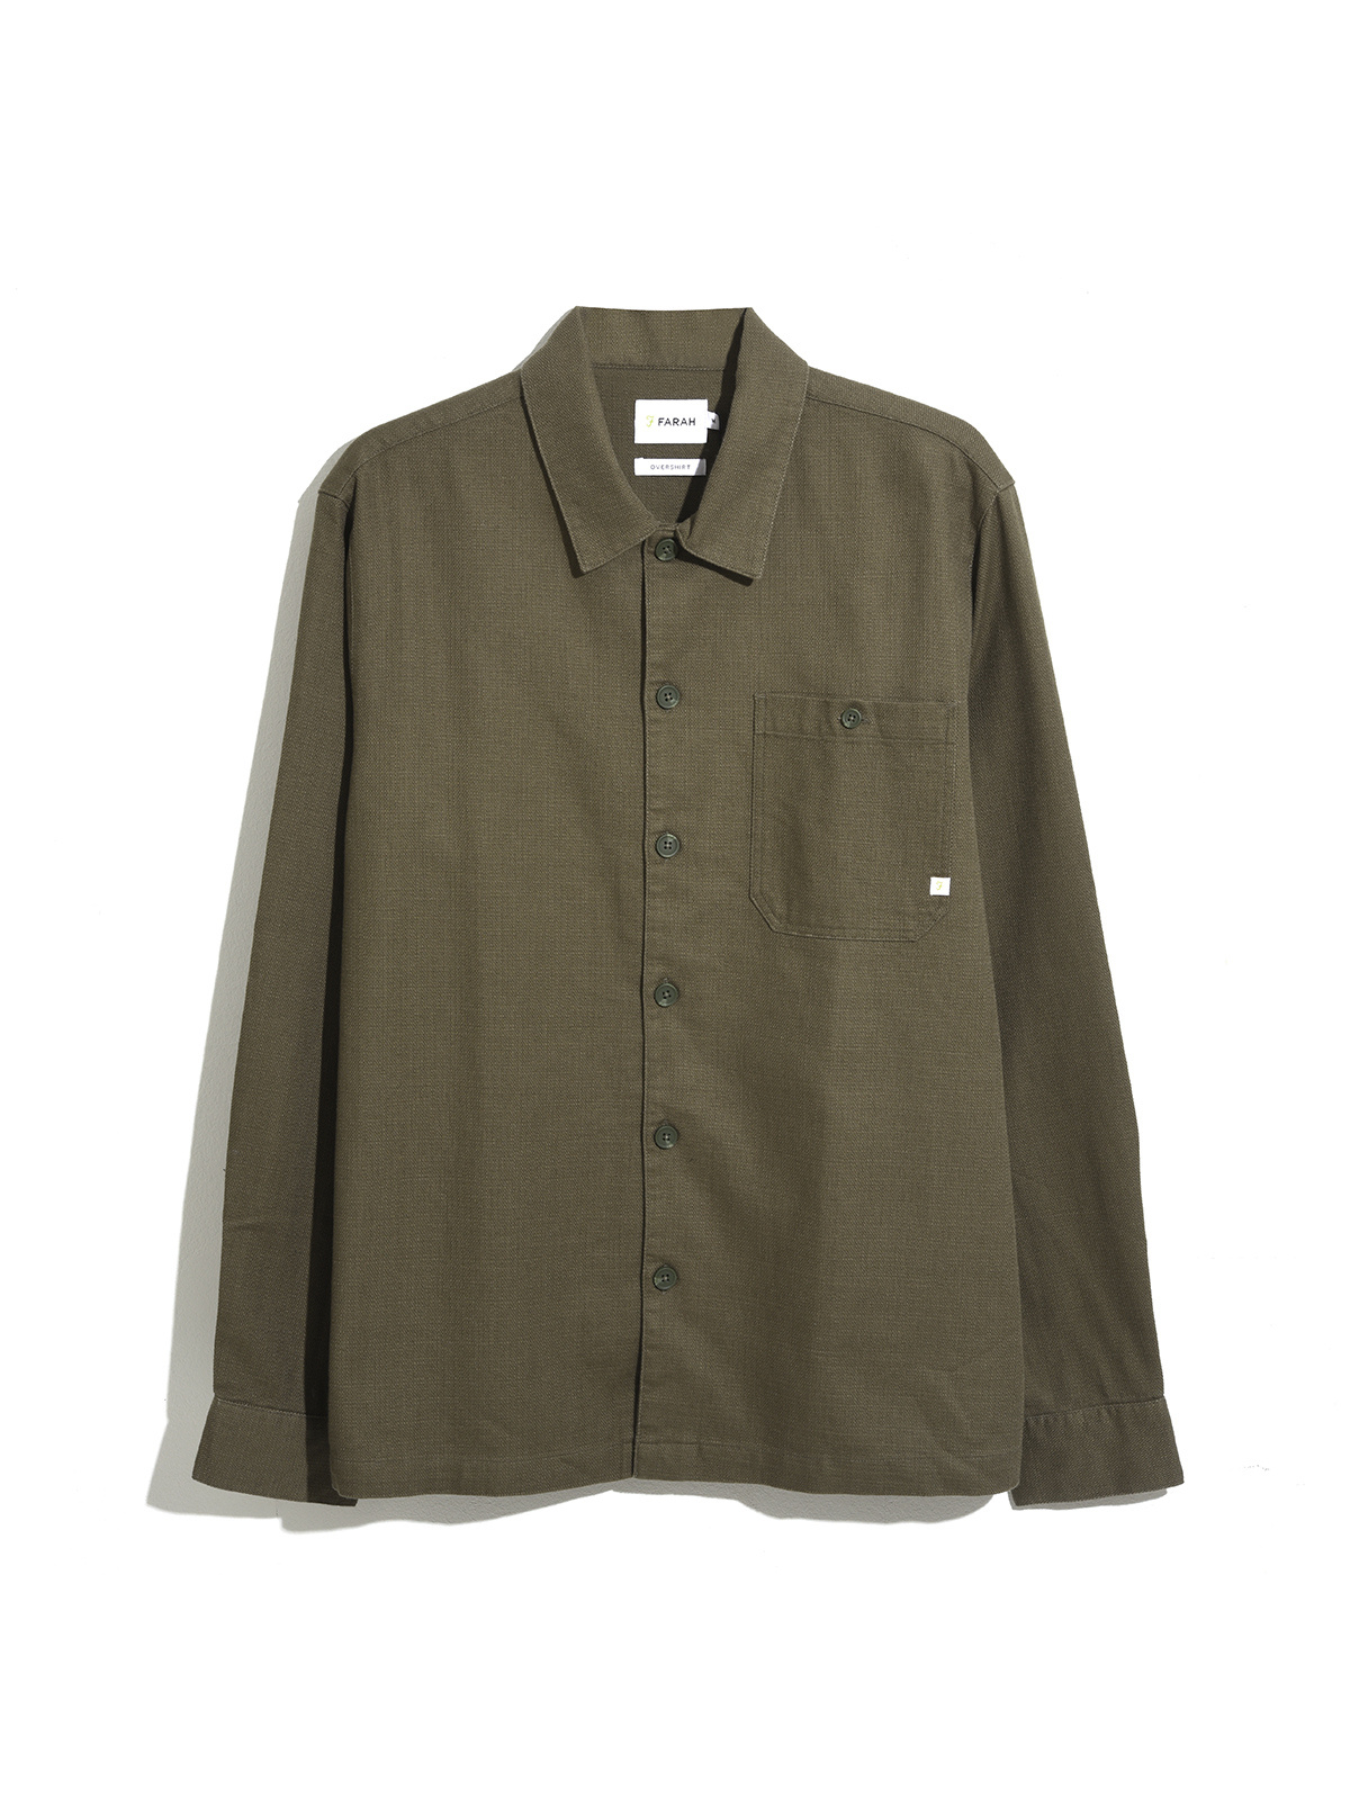 View Firmin Relaxed Fit Organic Cotton Long Sleeve Shirt In Olive Green information